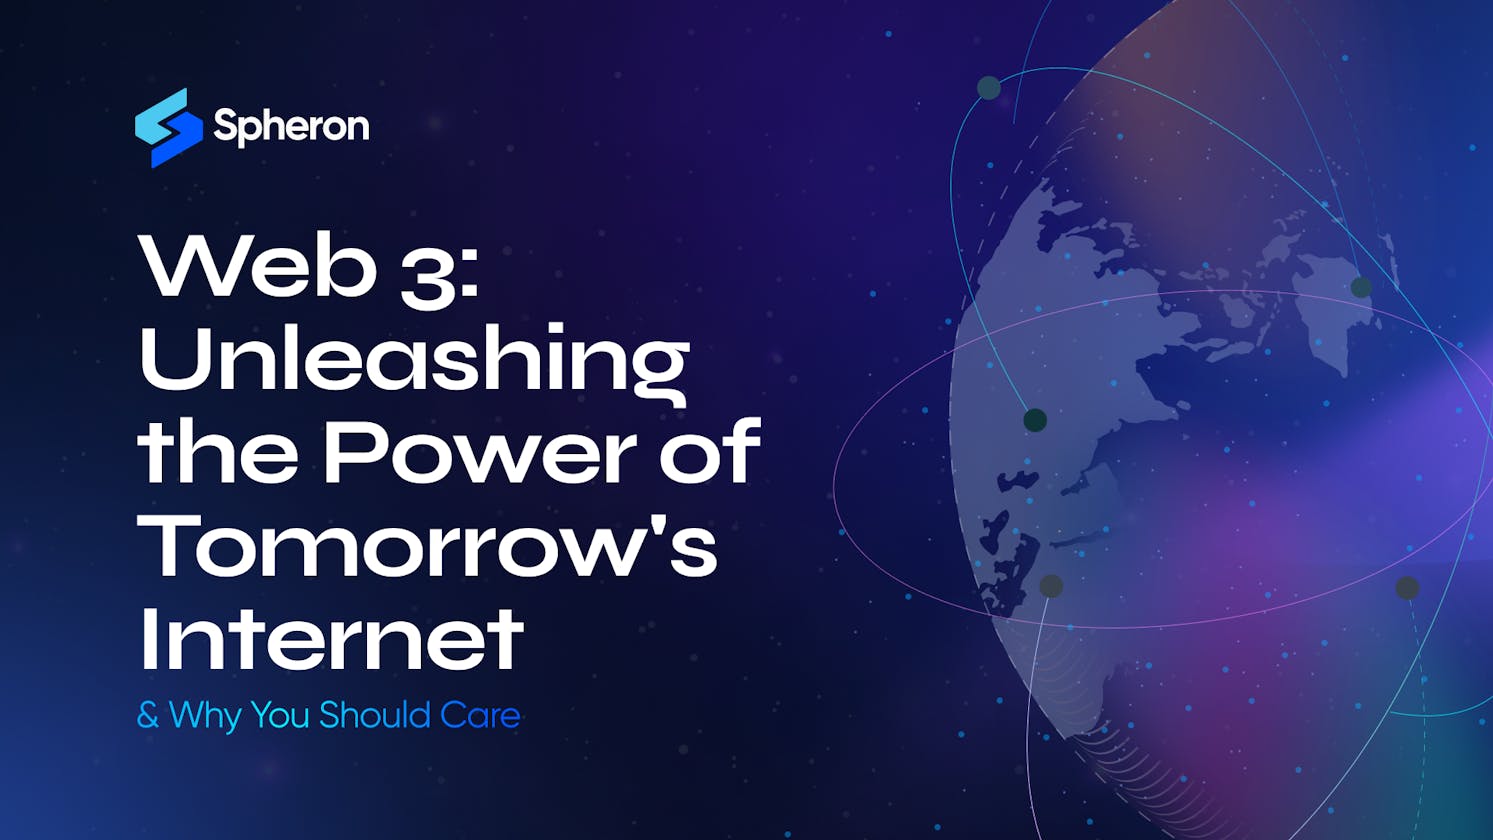 Web 3: Unleashing the Power of Tomorrow's Internet - Why It Matters